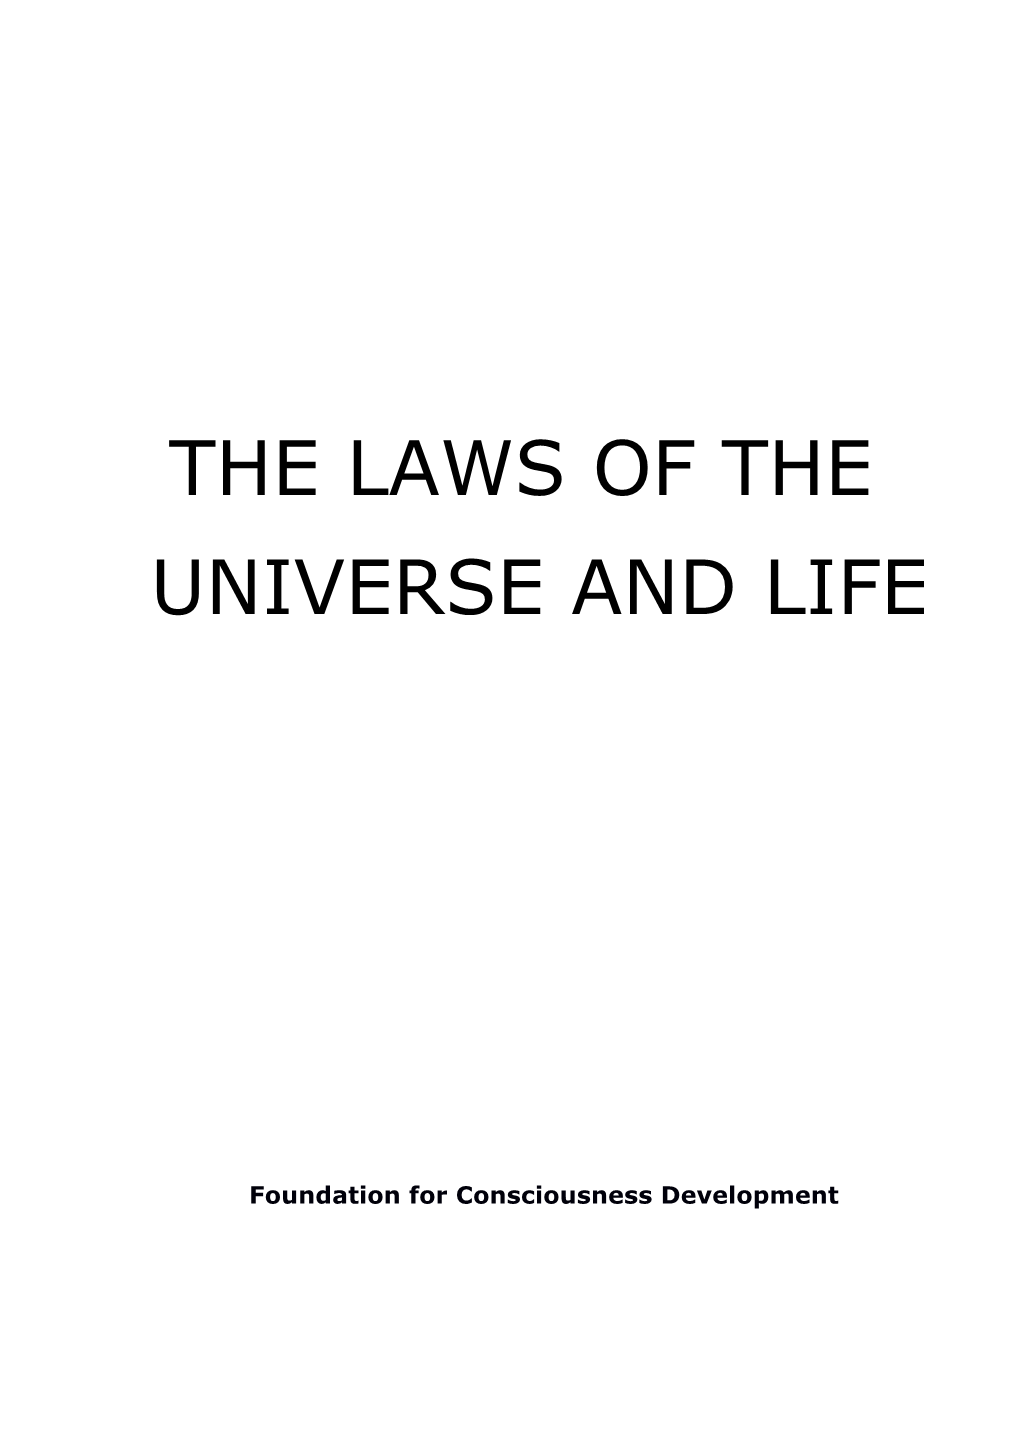 The Laws of the Universe and Life